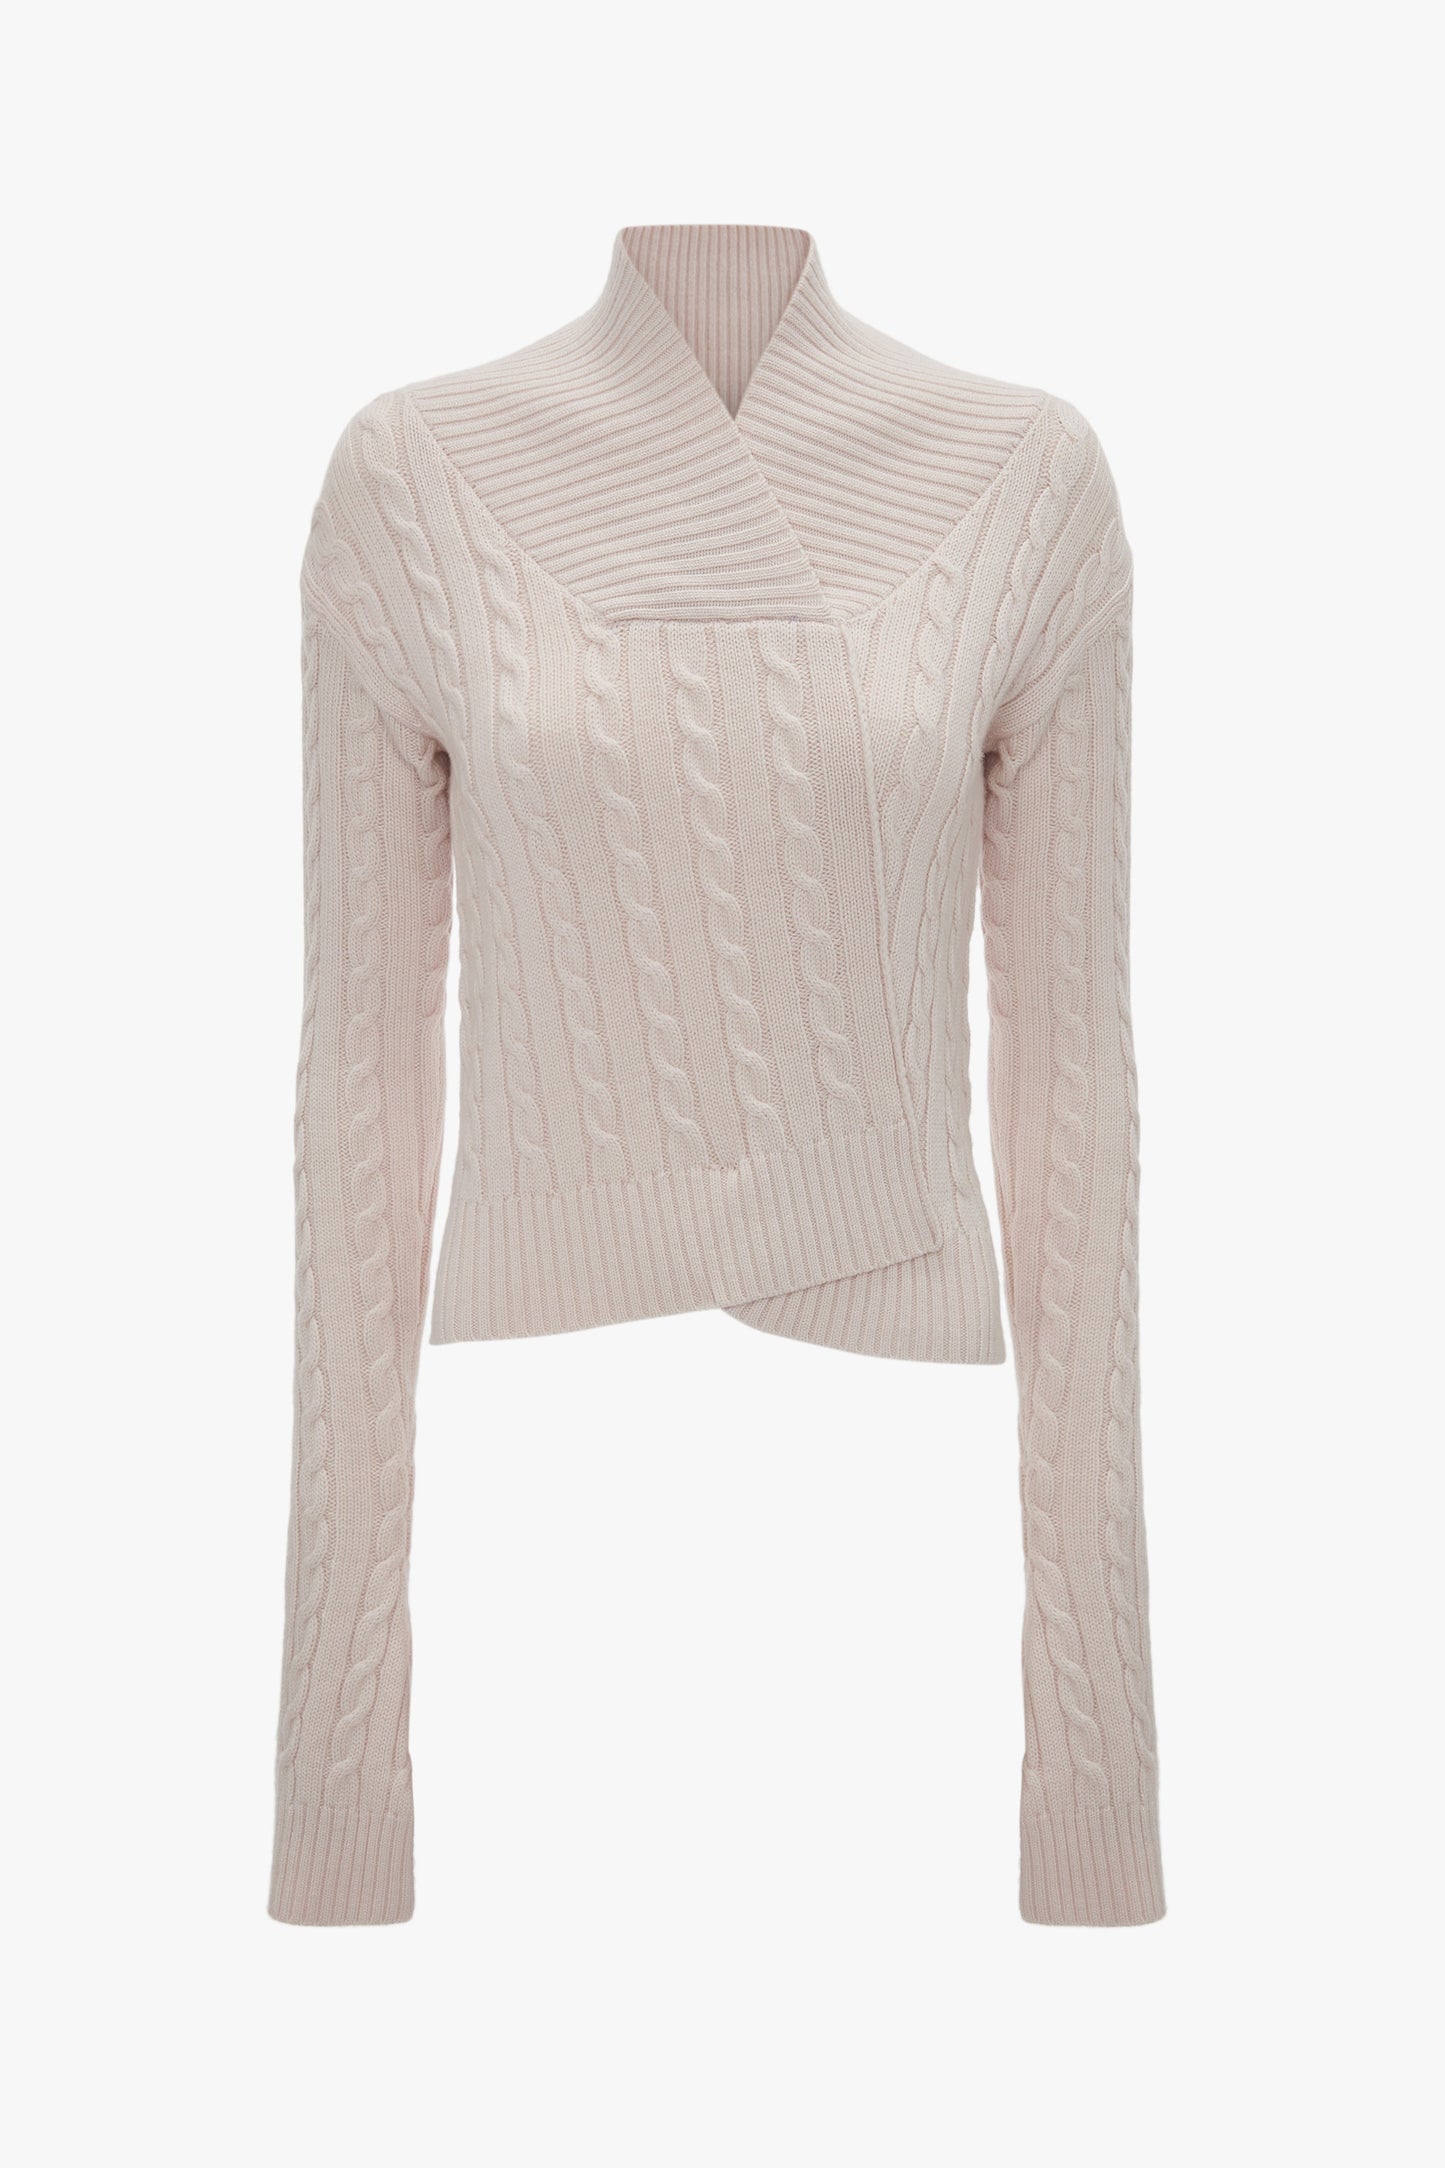 A light pink, long-sleeved, cable-knit sweater crafted from luxury merino wool with a wrap-over front and ribbed cuffs and hem from Victoria Beckham called the Wrap Detail Jumper In Bone.